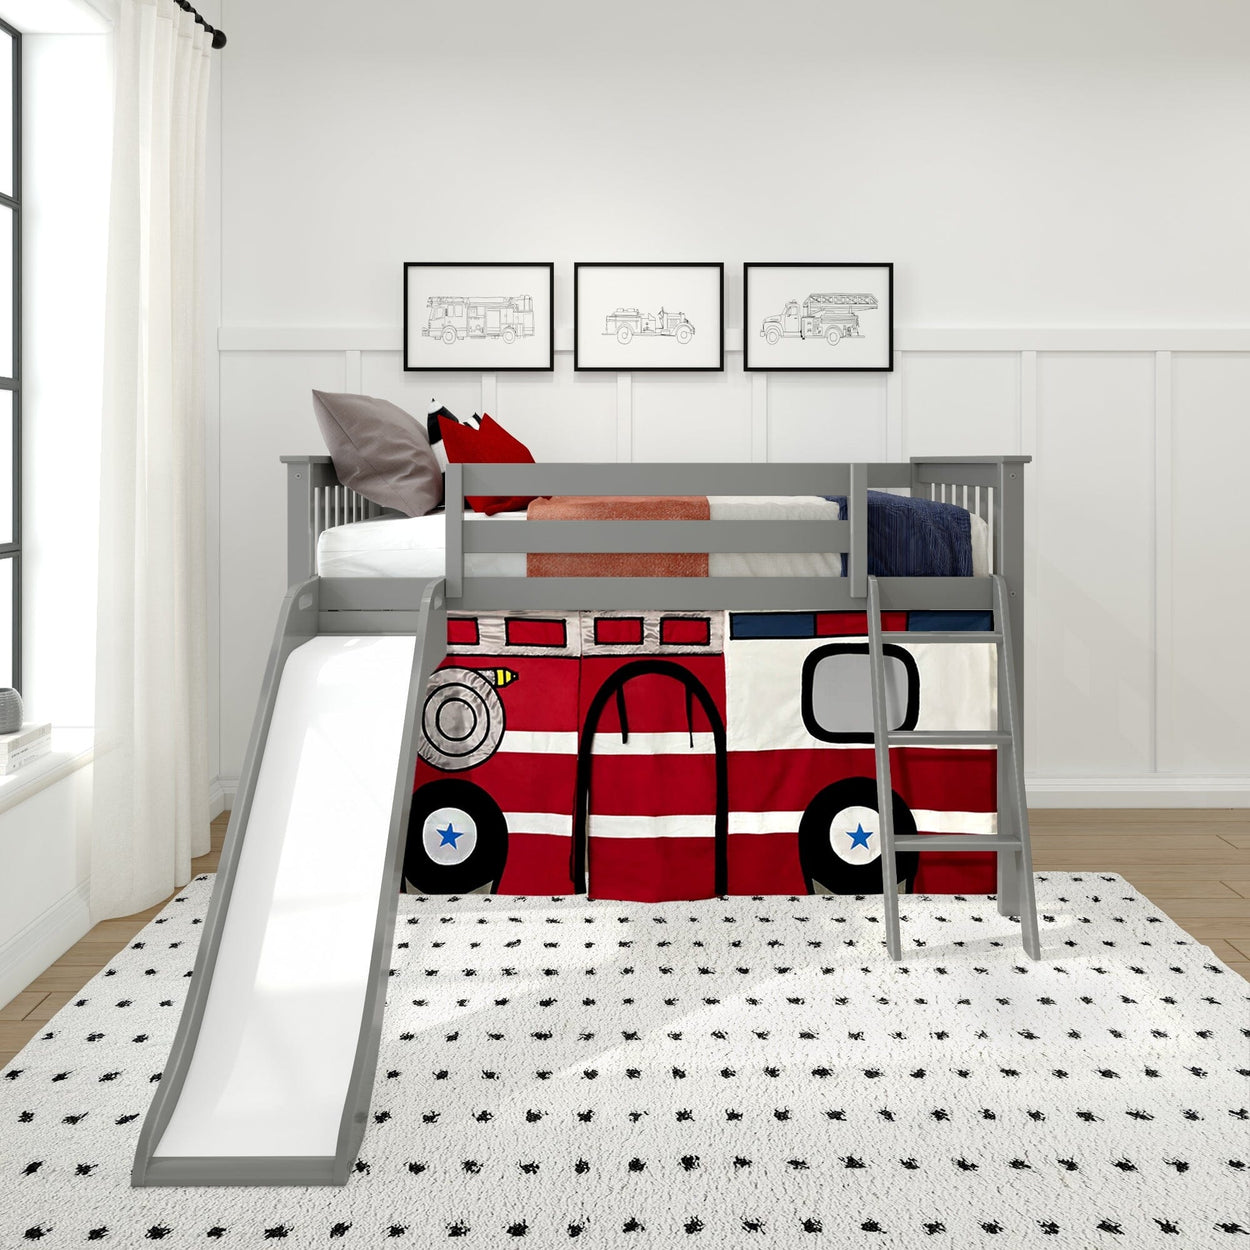 180413121043 : Loft Beds Low Loft with Easy Slide and Firetruck Curtain, Grey